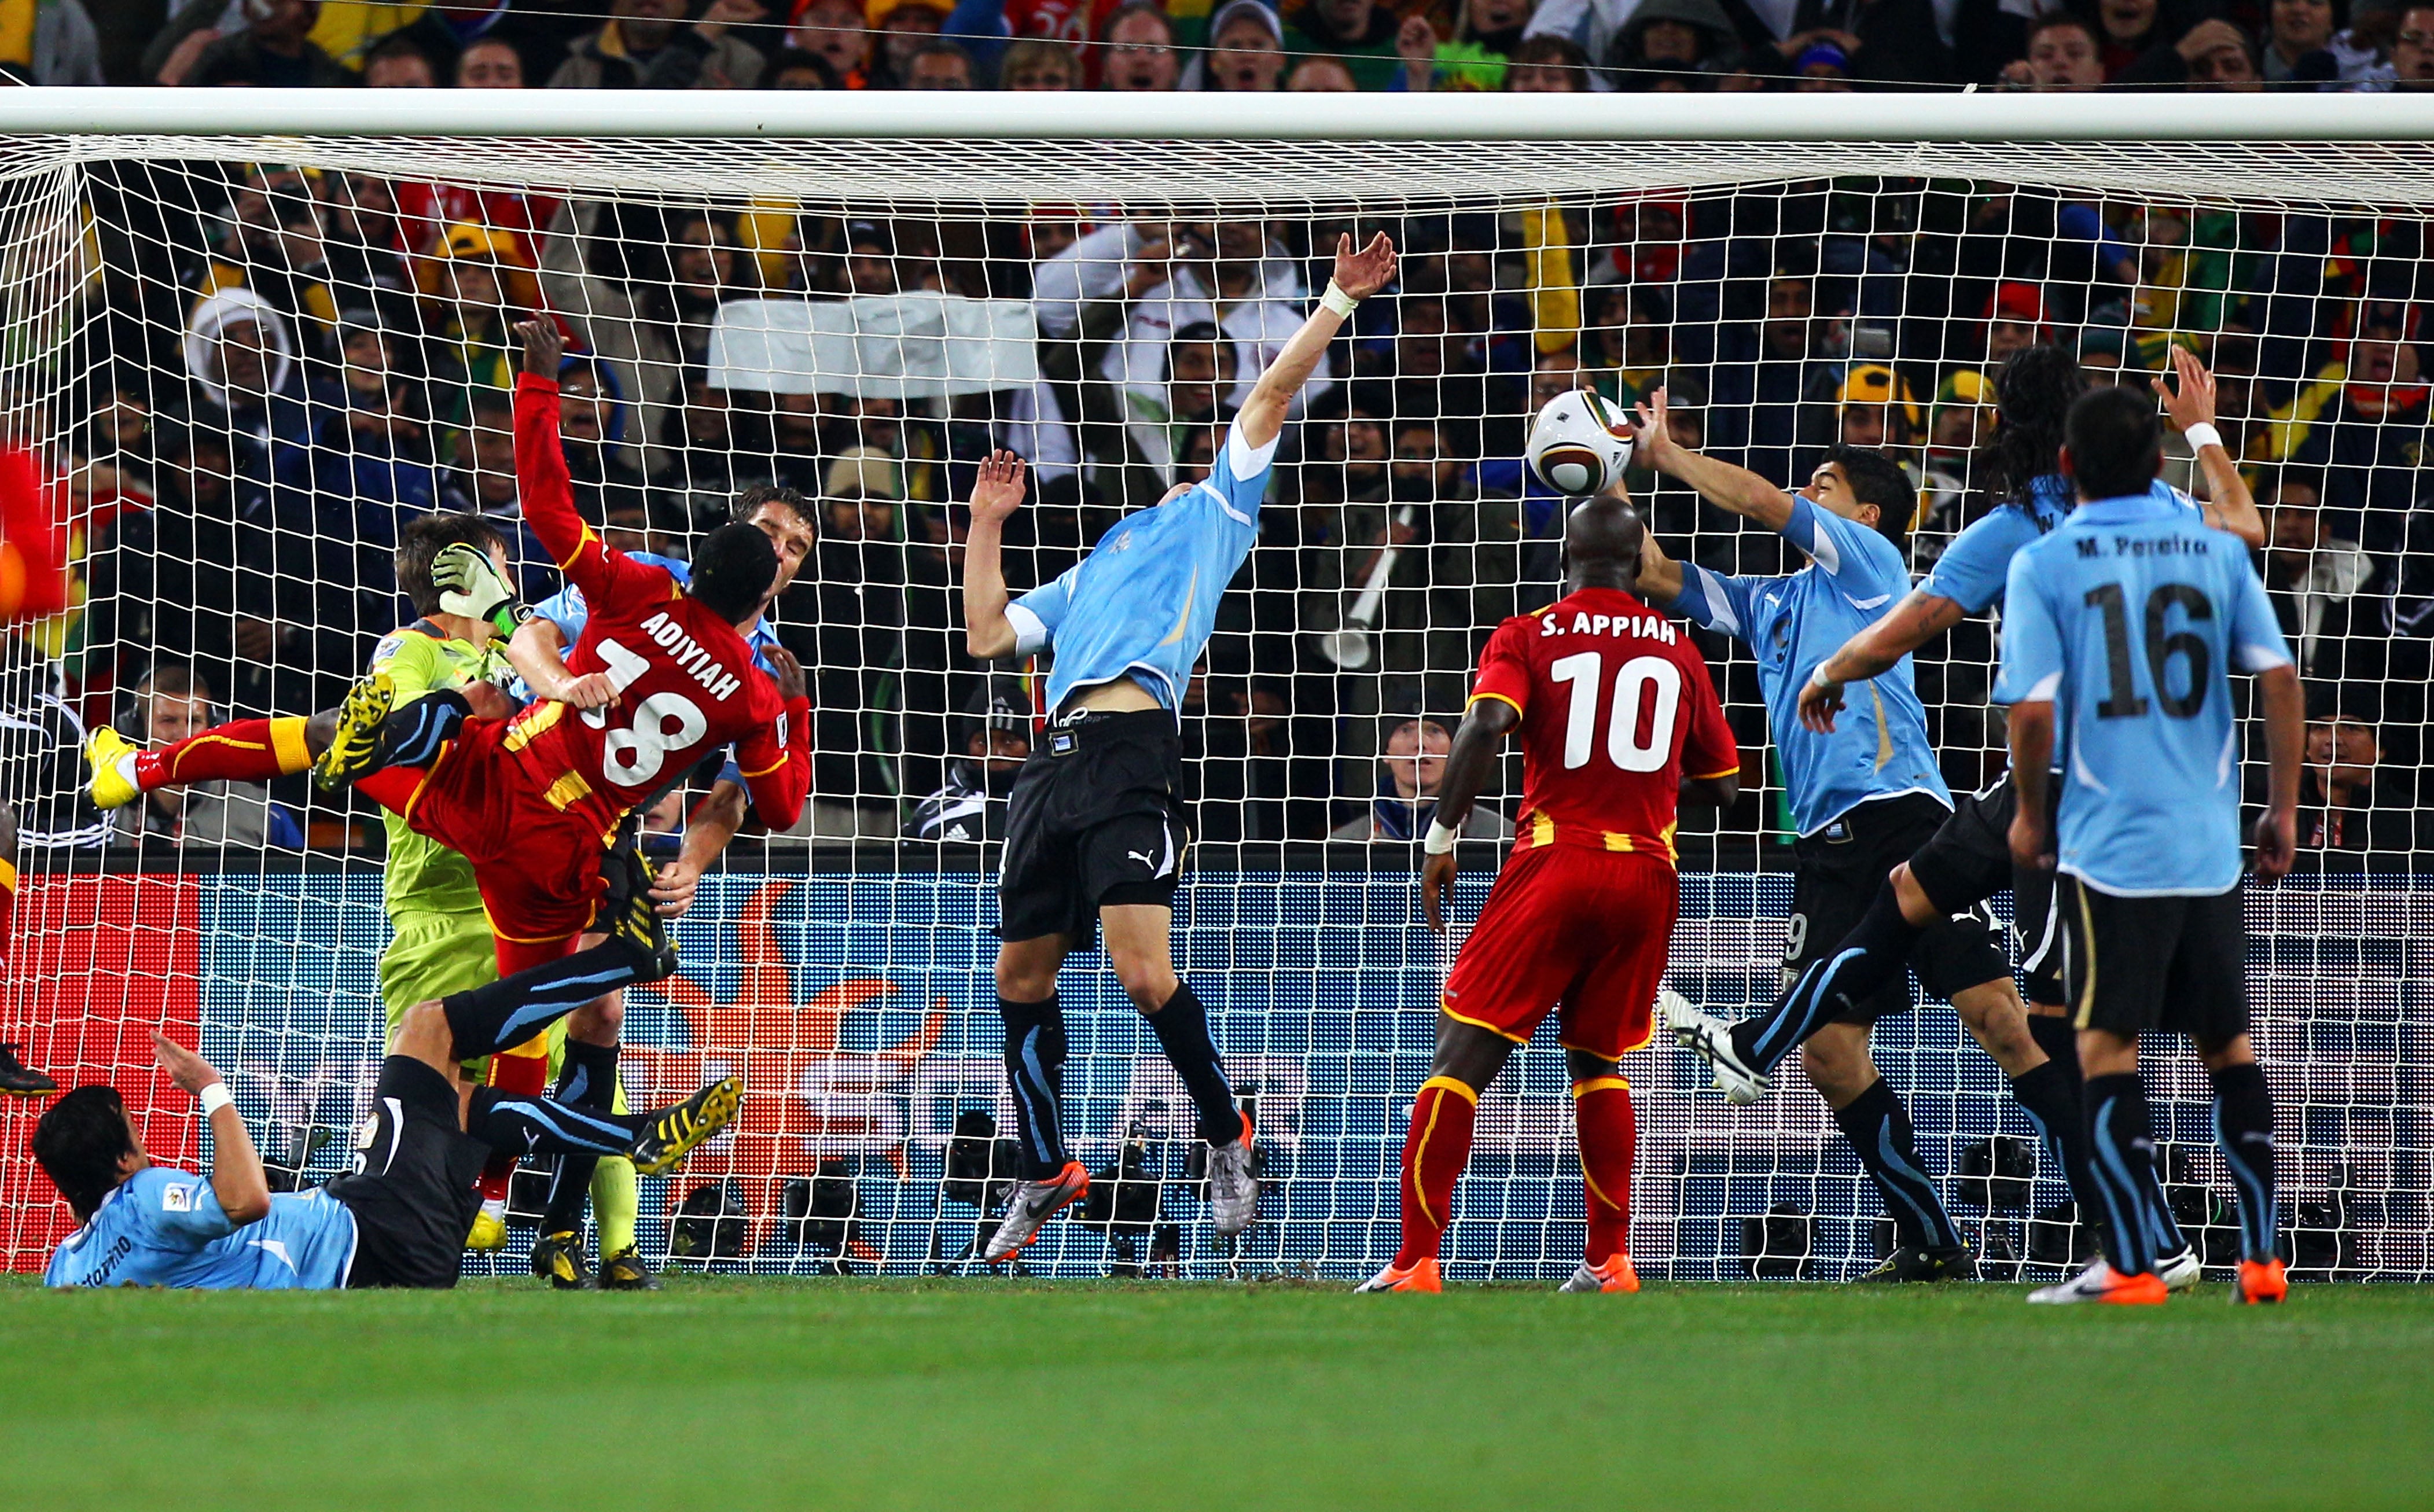 Ghana and Uruguay will meet in a rematch of the infamous 2010 World Cup quarter-final